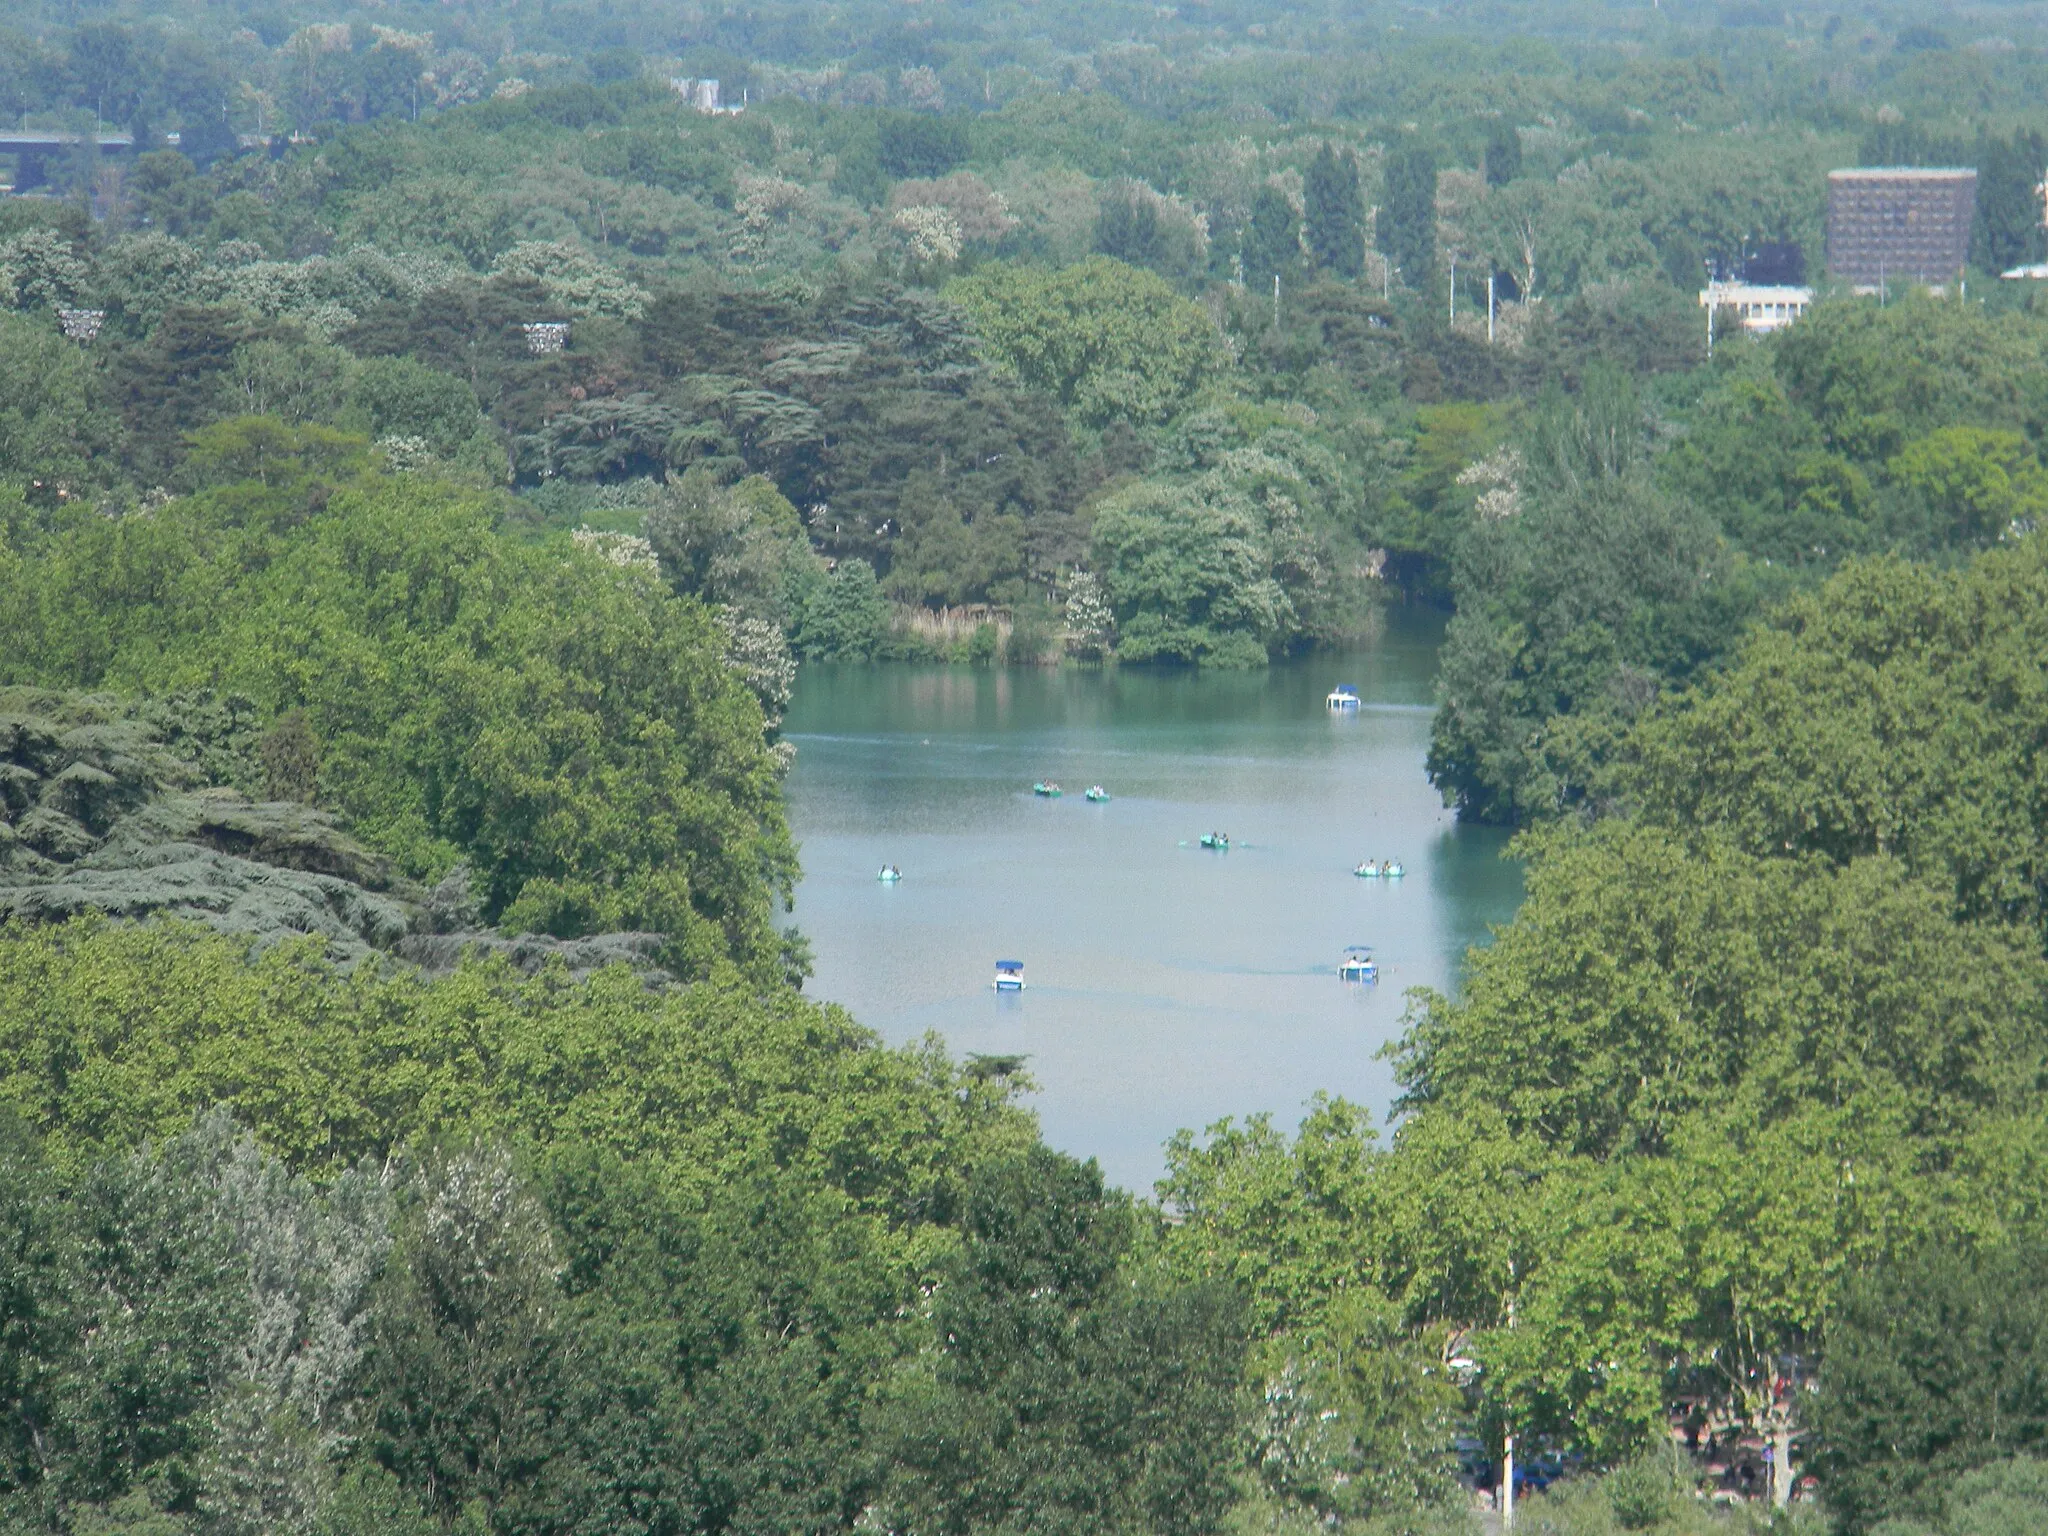 Photo showing: The lake of the Tête d'Or park in Lyon